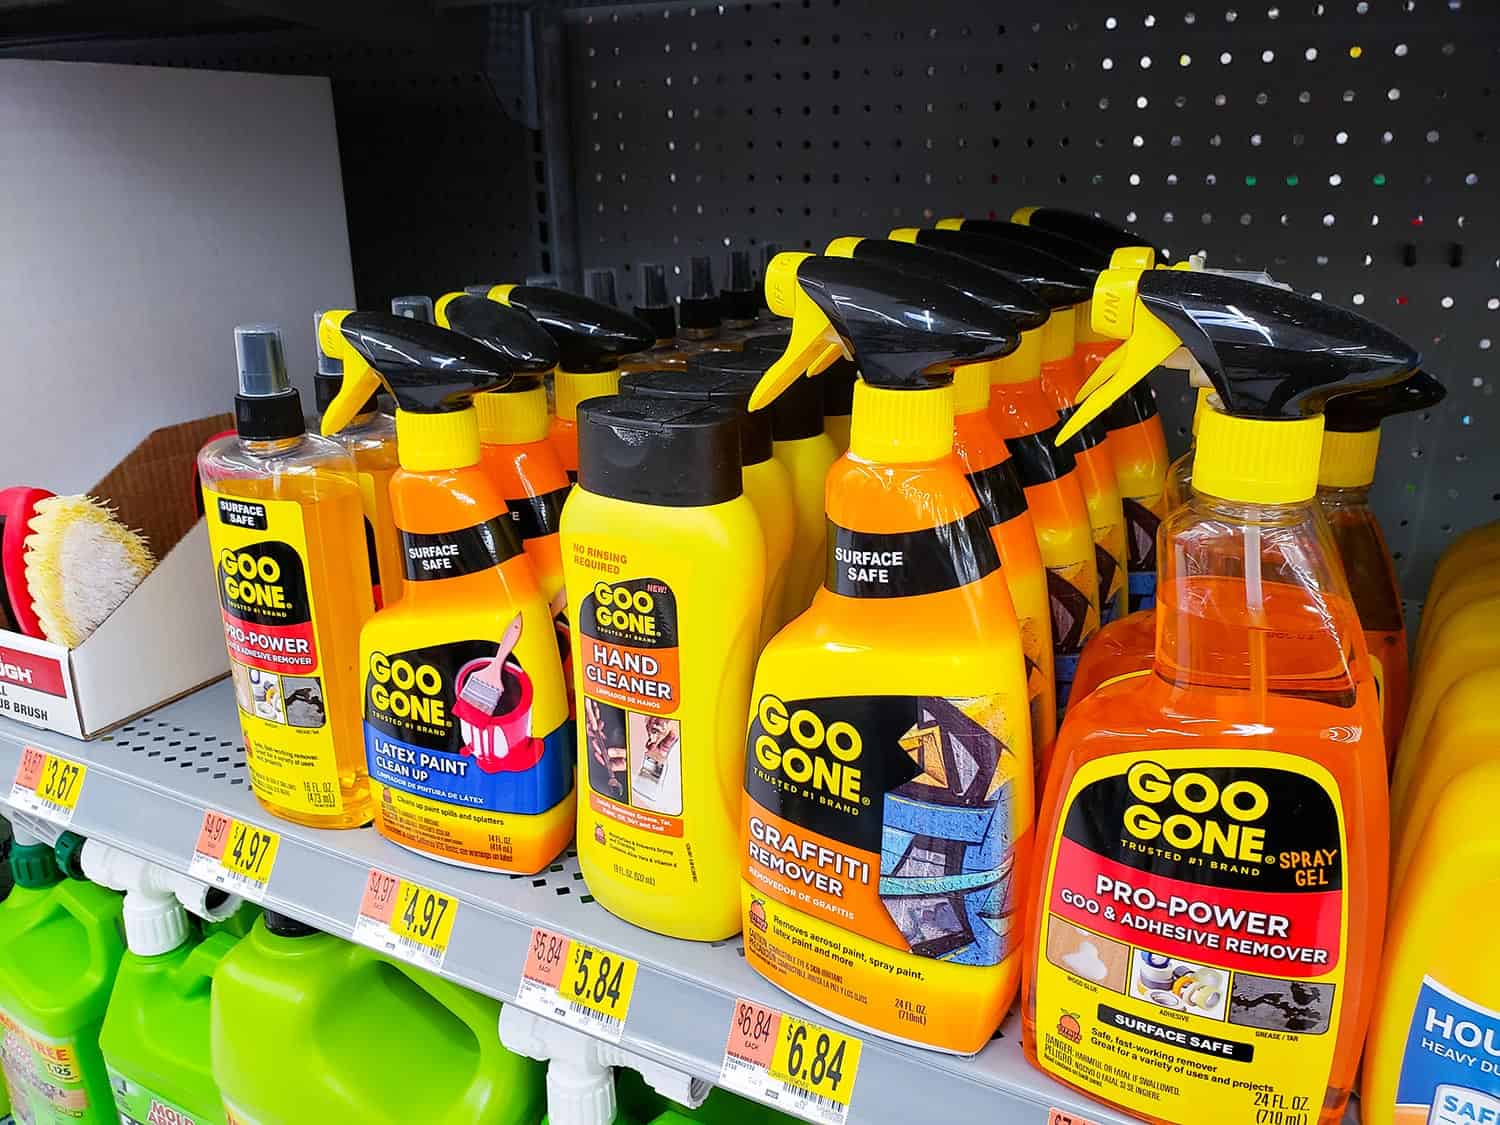 Goo Gone adhesive remover products